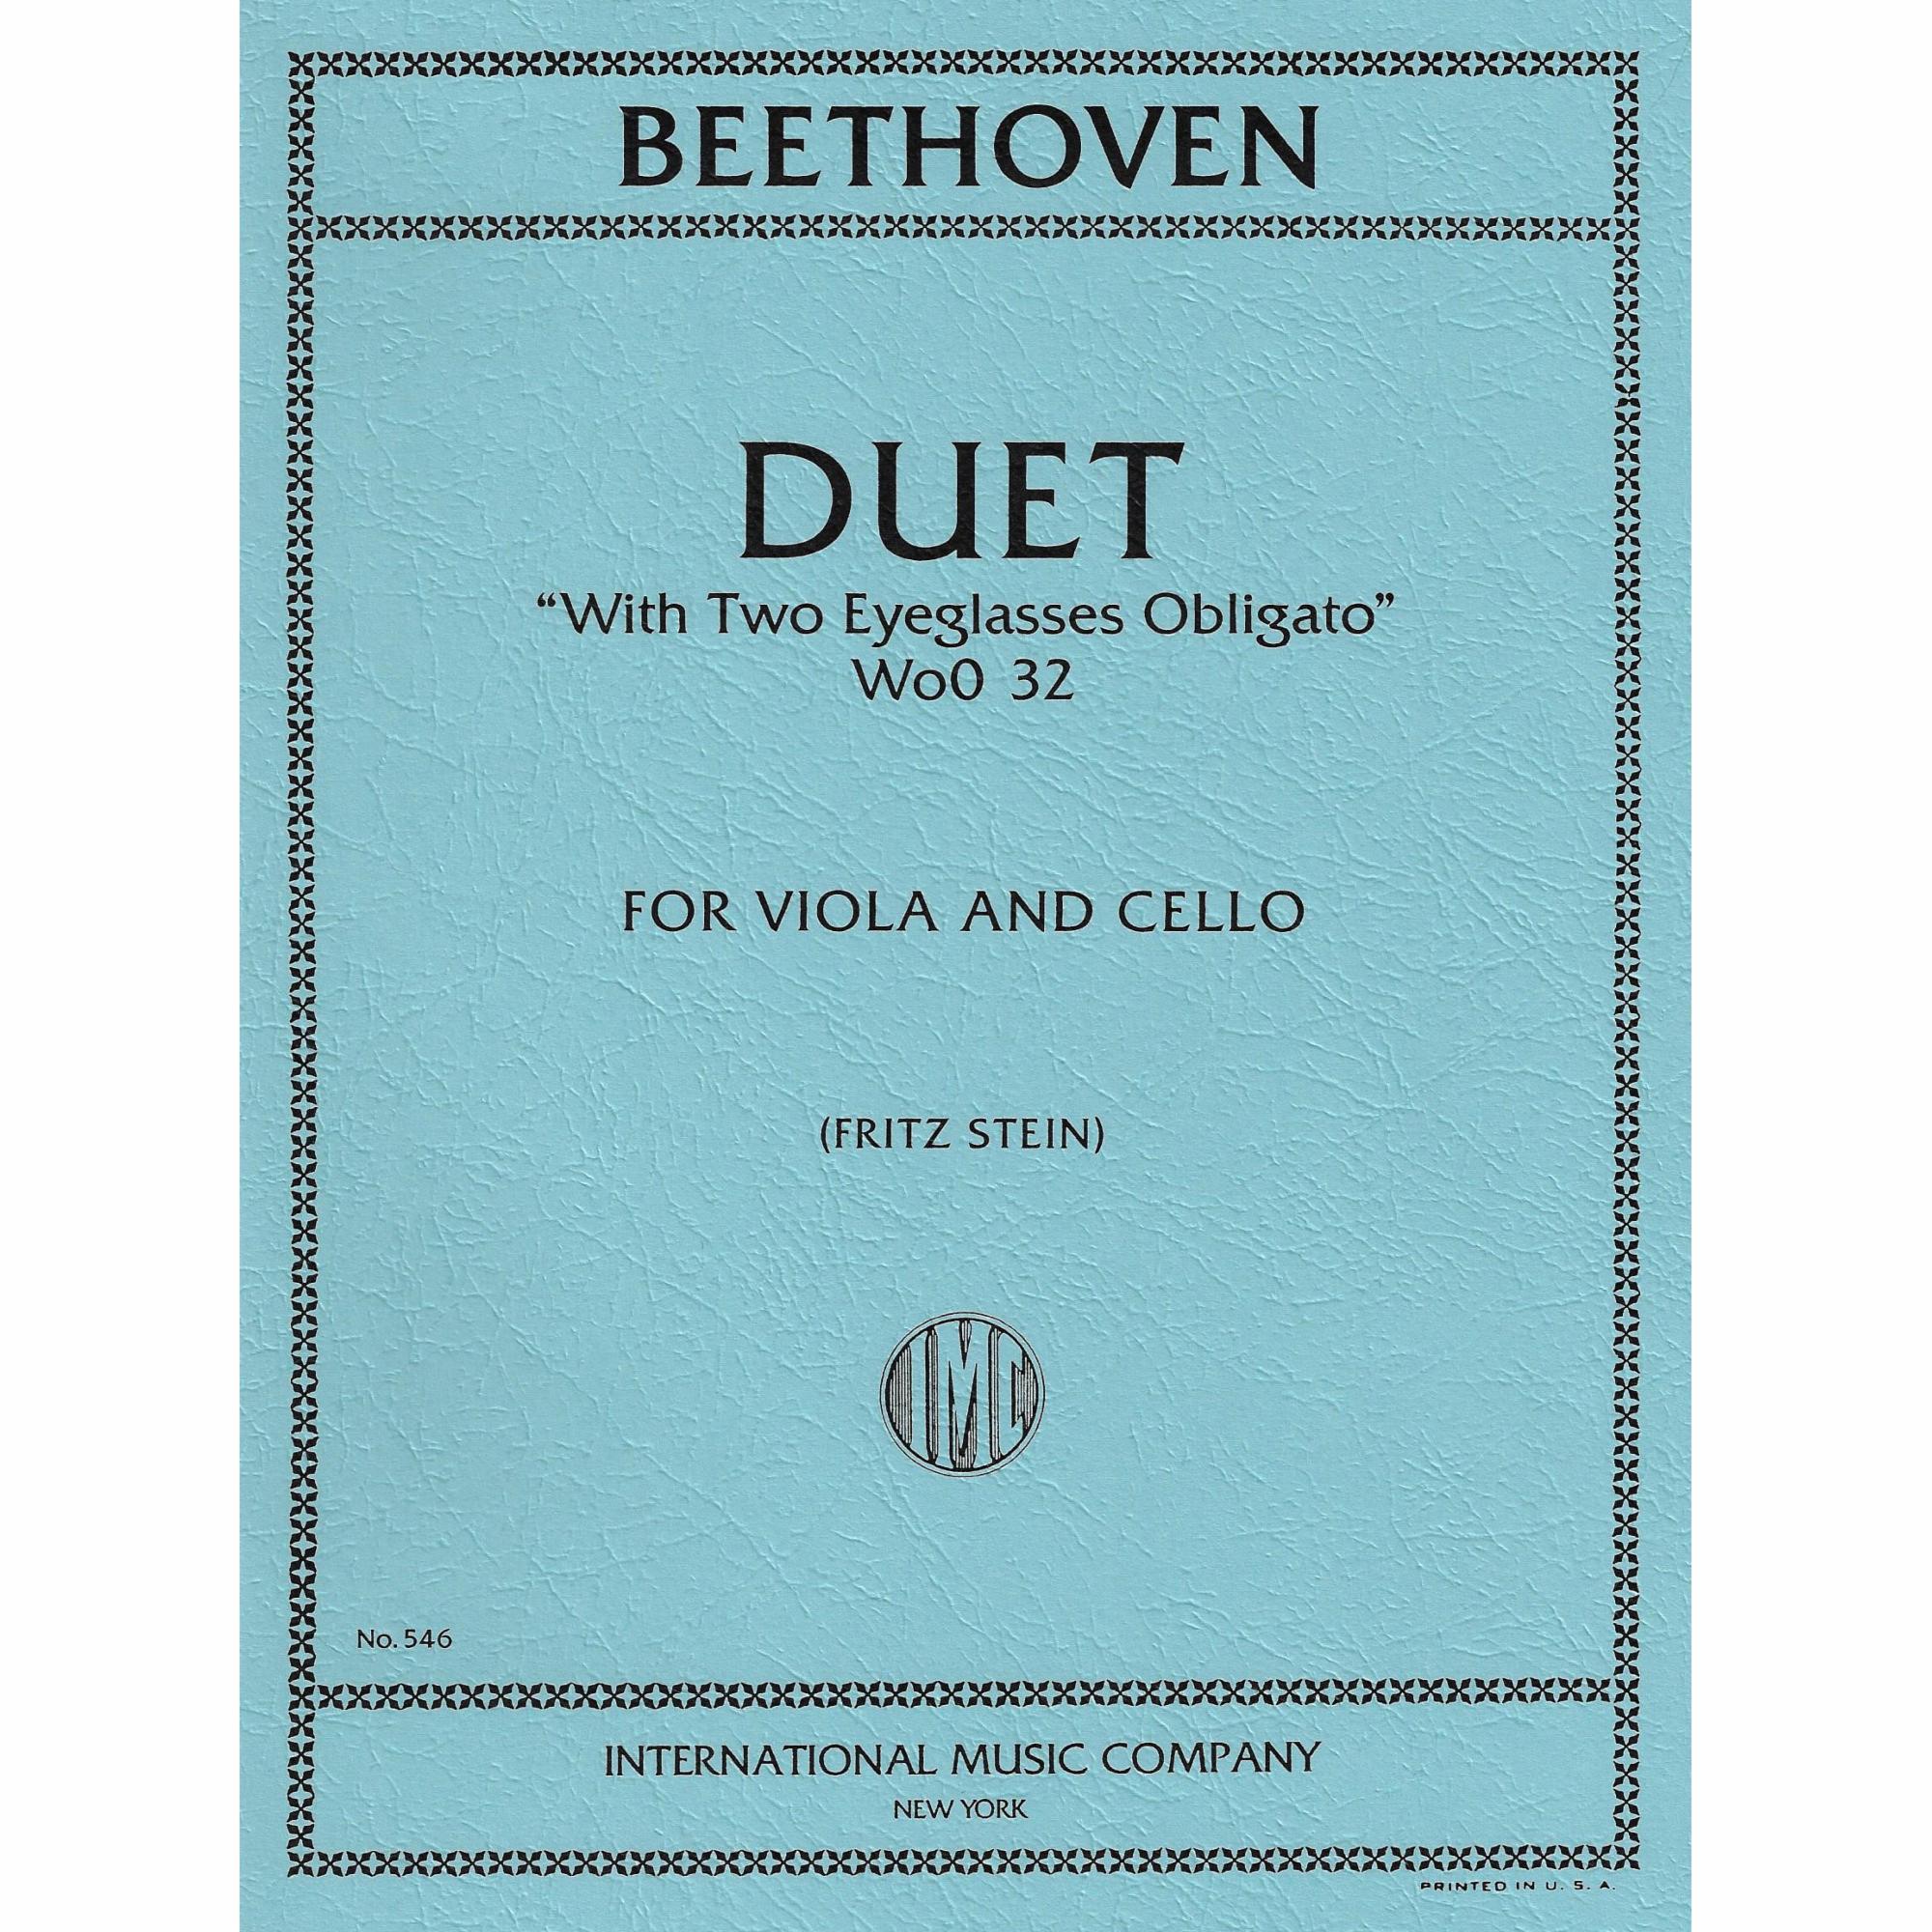 Beethoven -- Duet 'With Two Eyeglasses Obligato', WoO 32 for Viola and Cello